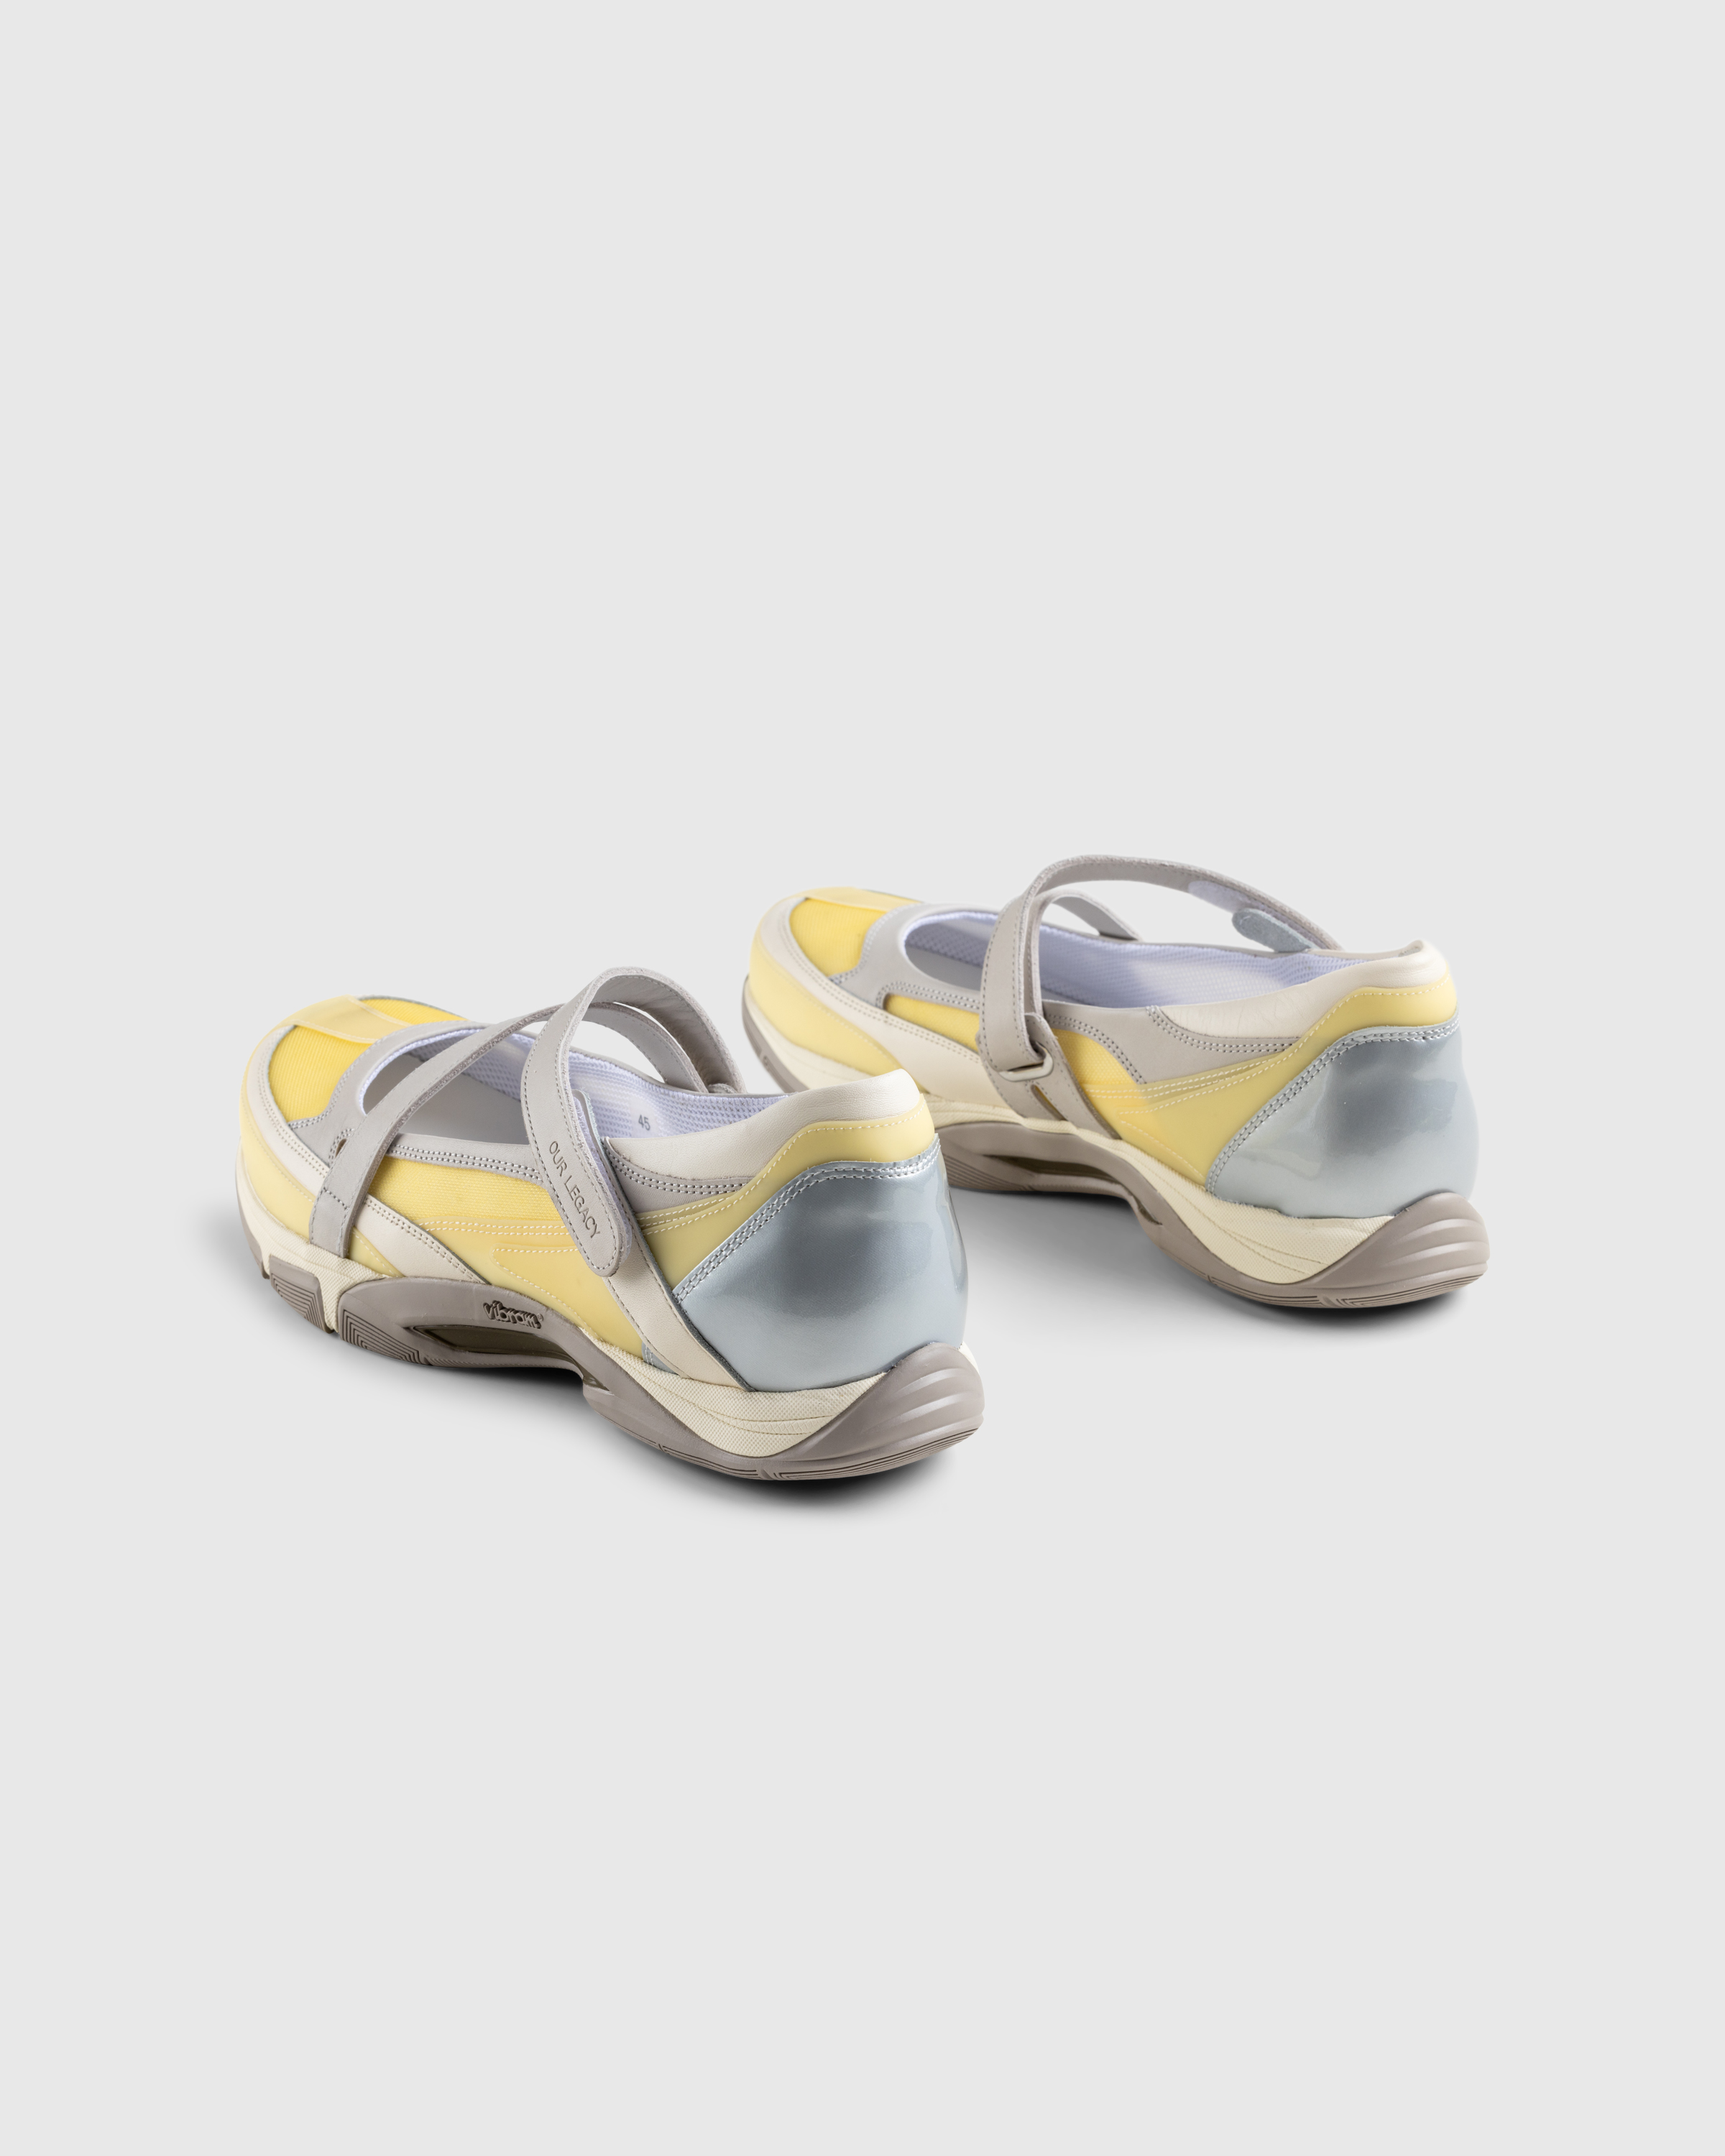 Our Legacy – Sweetheart Sport Technical Acid Leather - Shoes - Yellow - Image 4